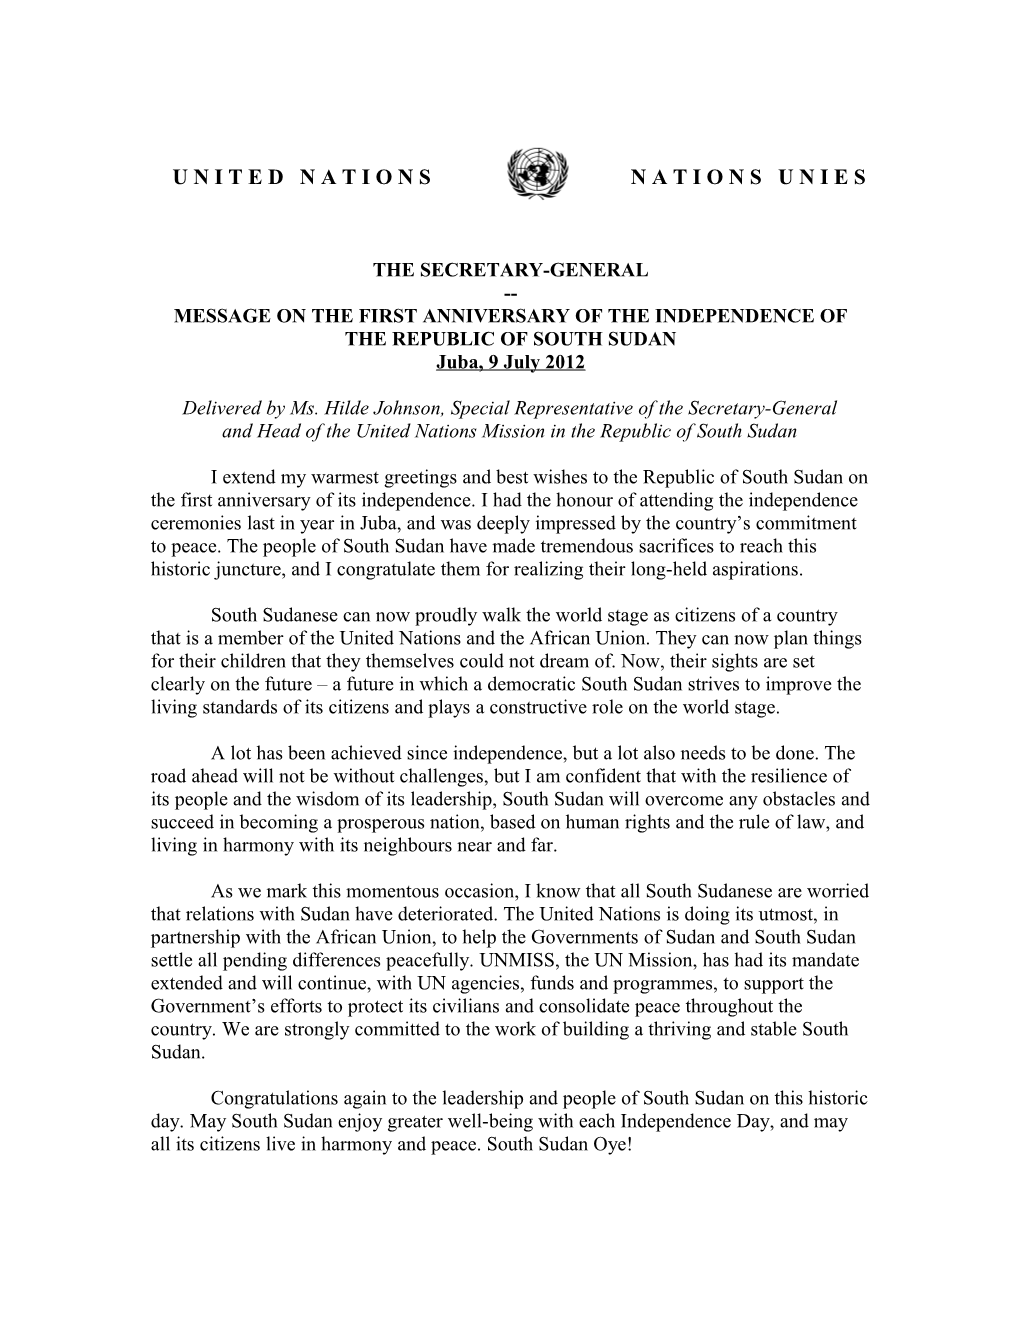 Message from the Secretary-General Ban Ki-Moon on the First Ann